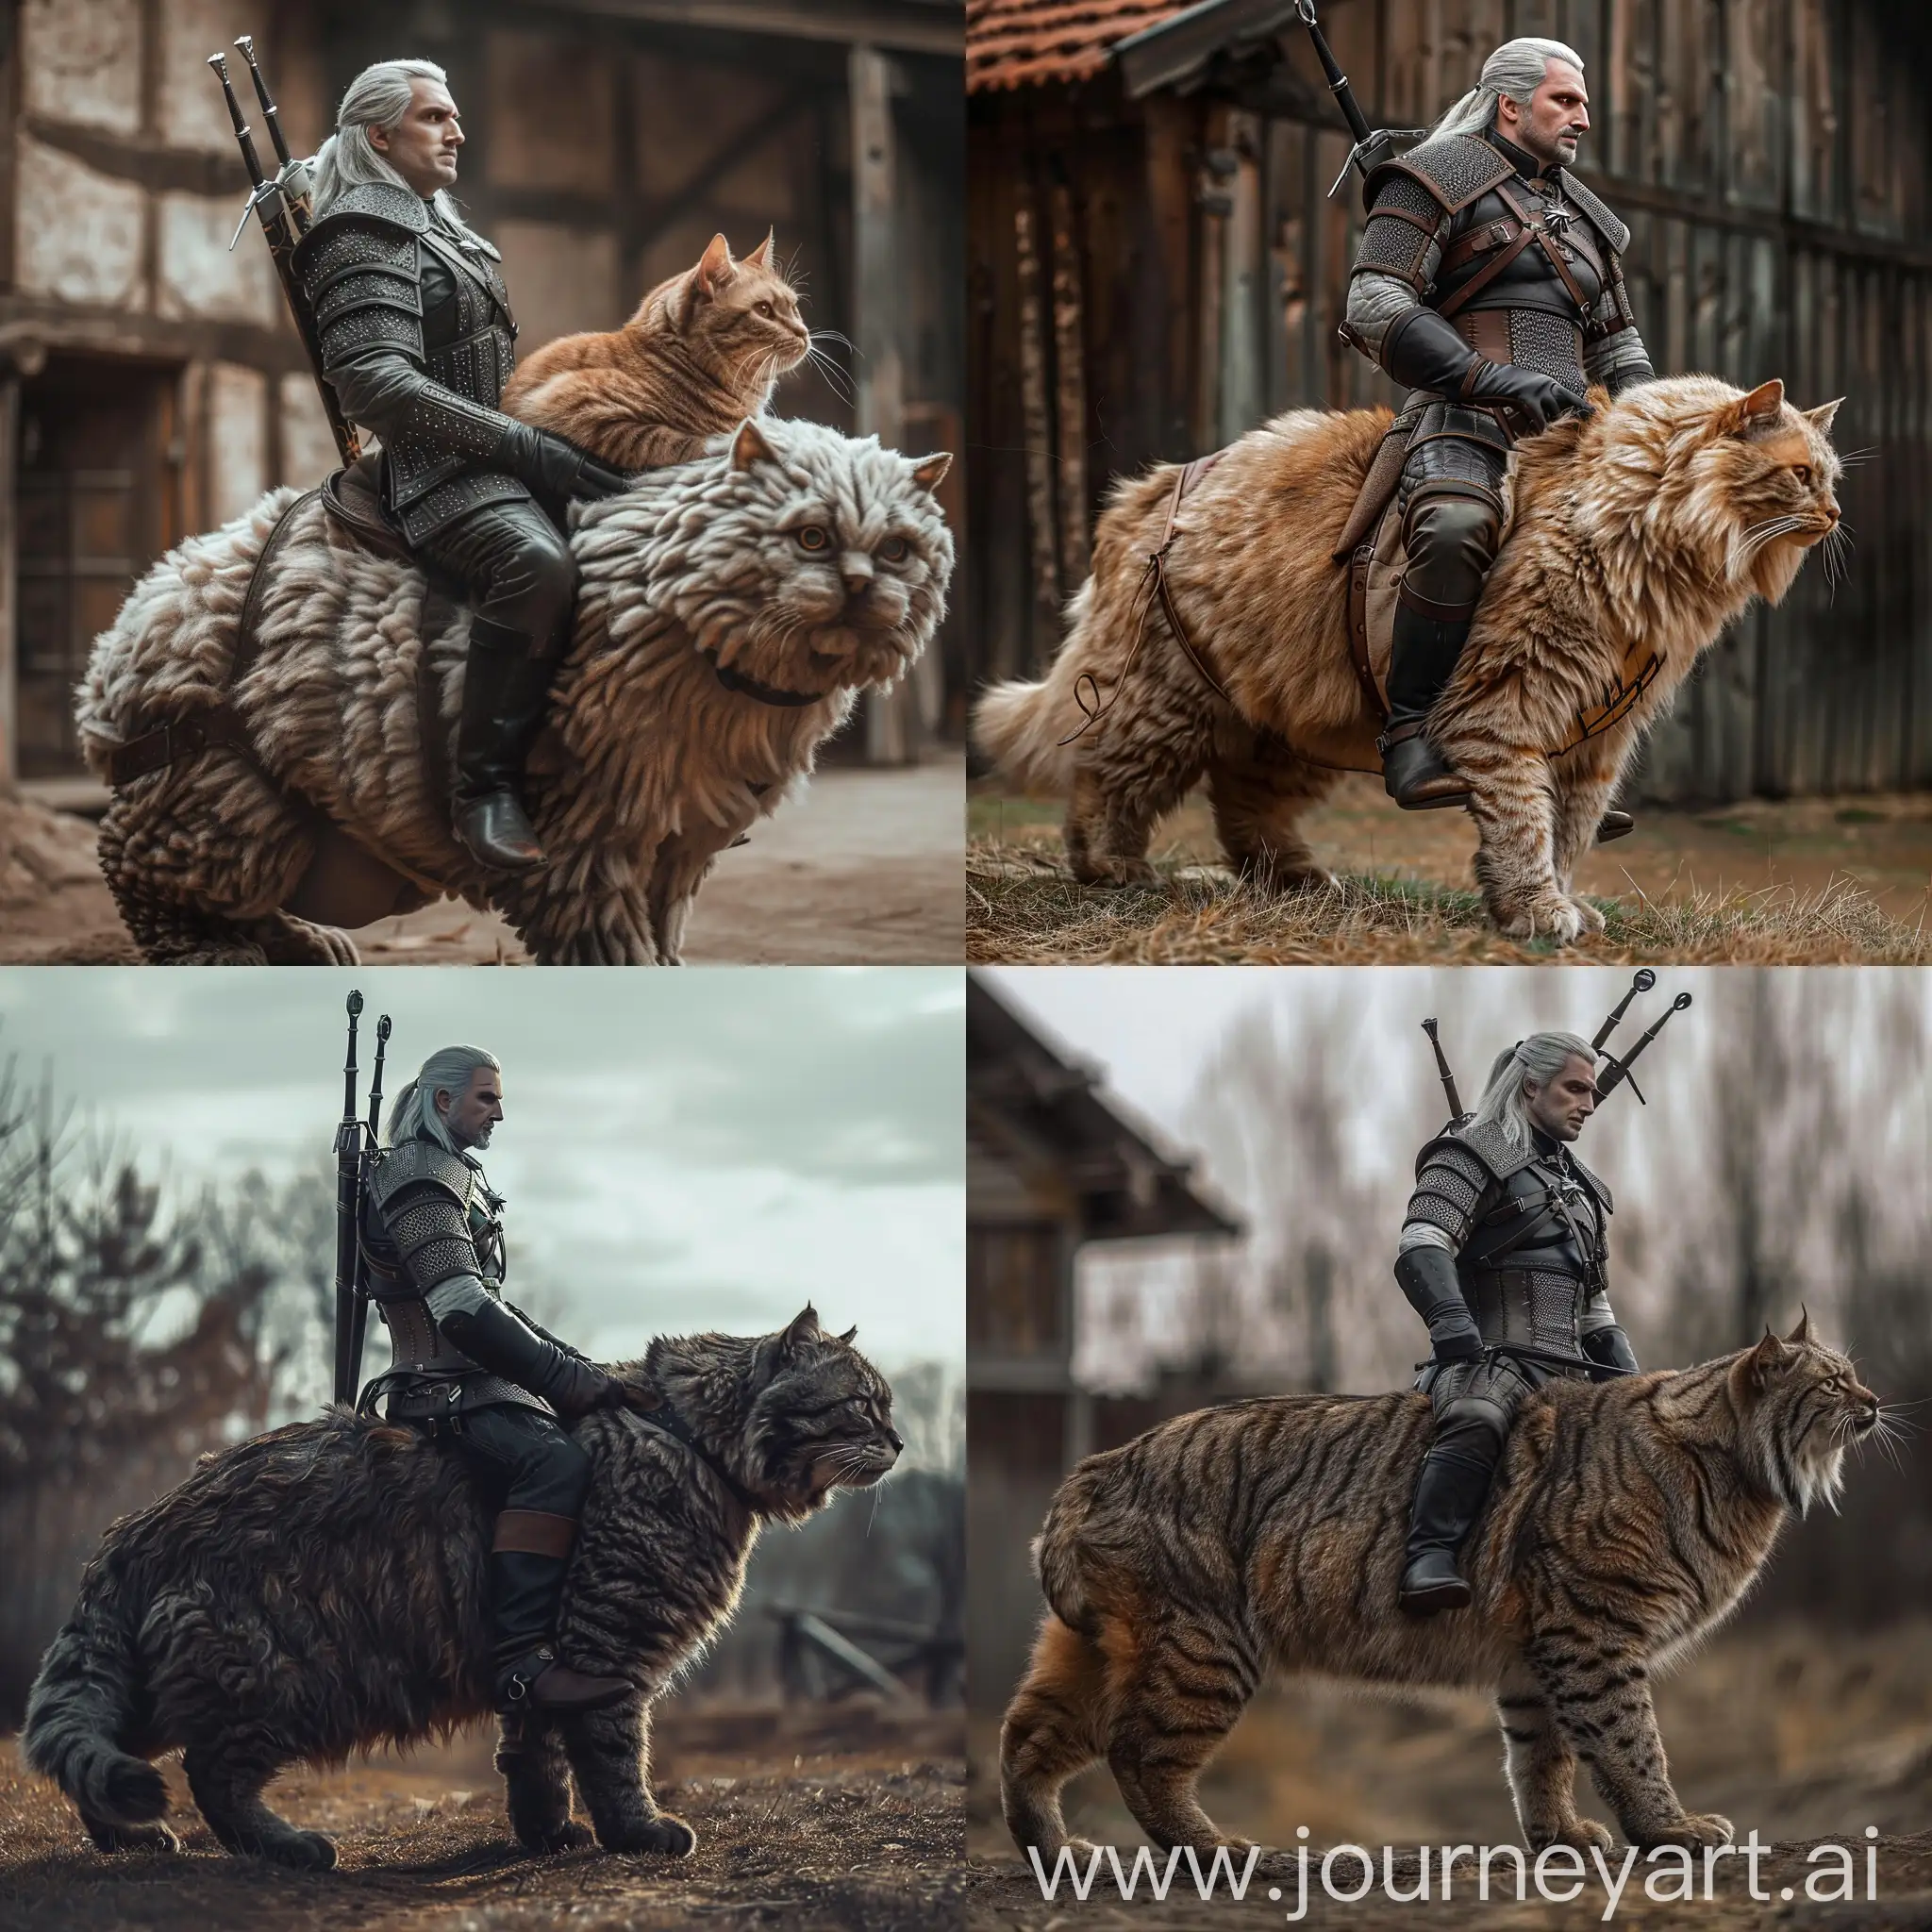 Geralt of Rivia from the "Witcher" game series rides a huge very cute domestic cat